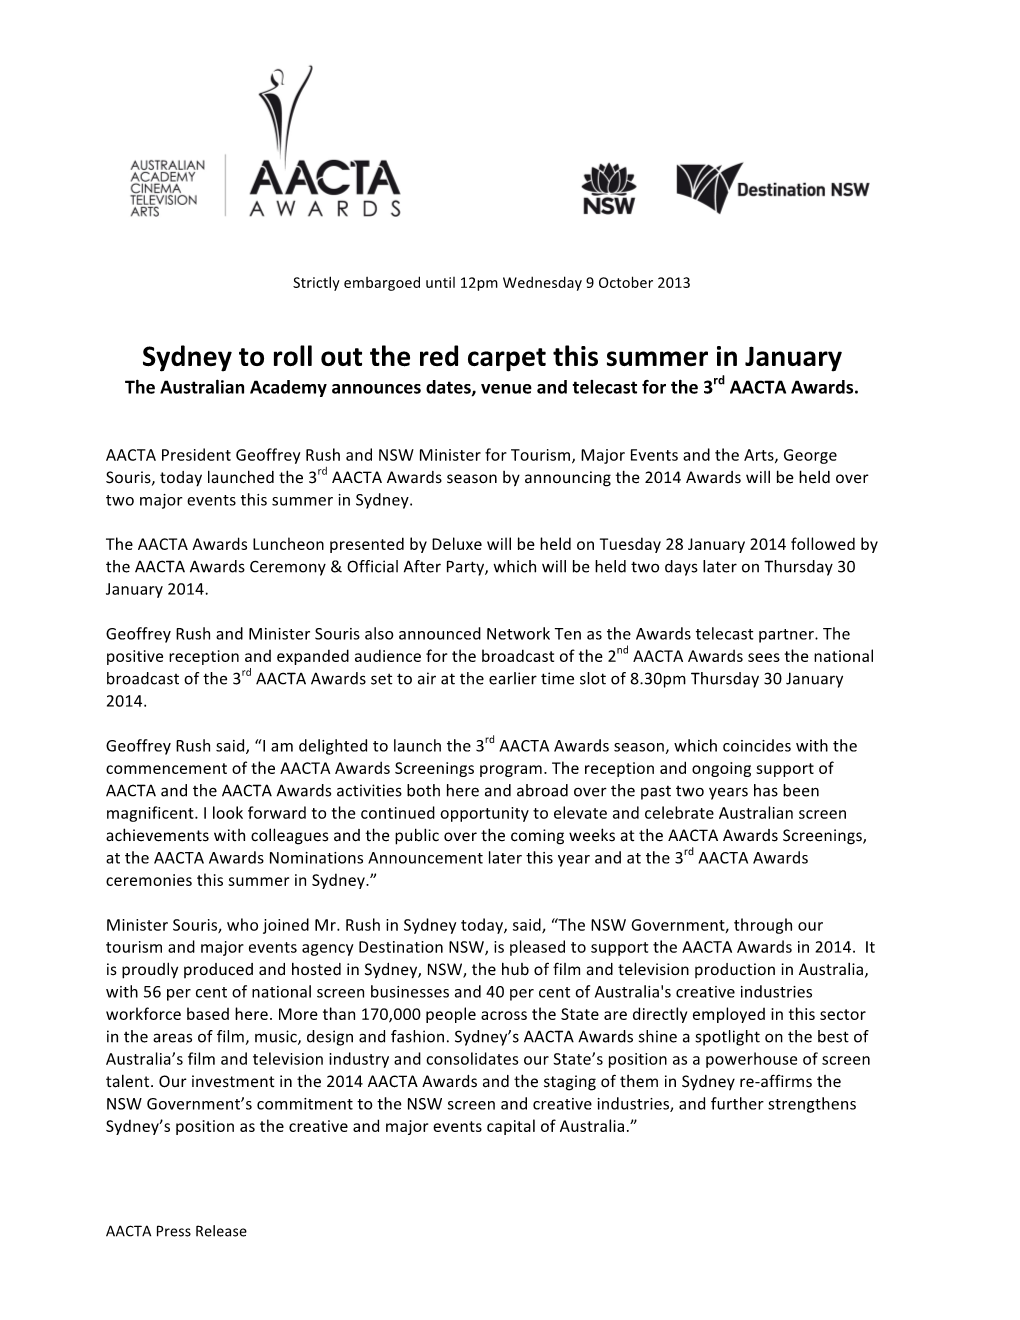 Sydney to Roll out the Red Carpet This Summer in January the Australian Academy Announces Dates, Venue and Telecast for the 3Rd AACTA Awards